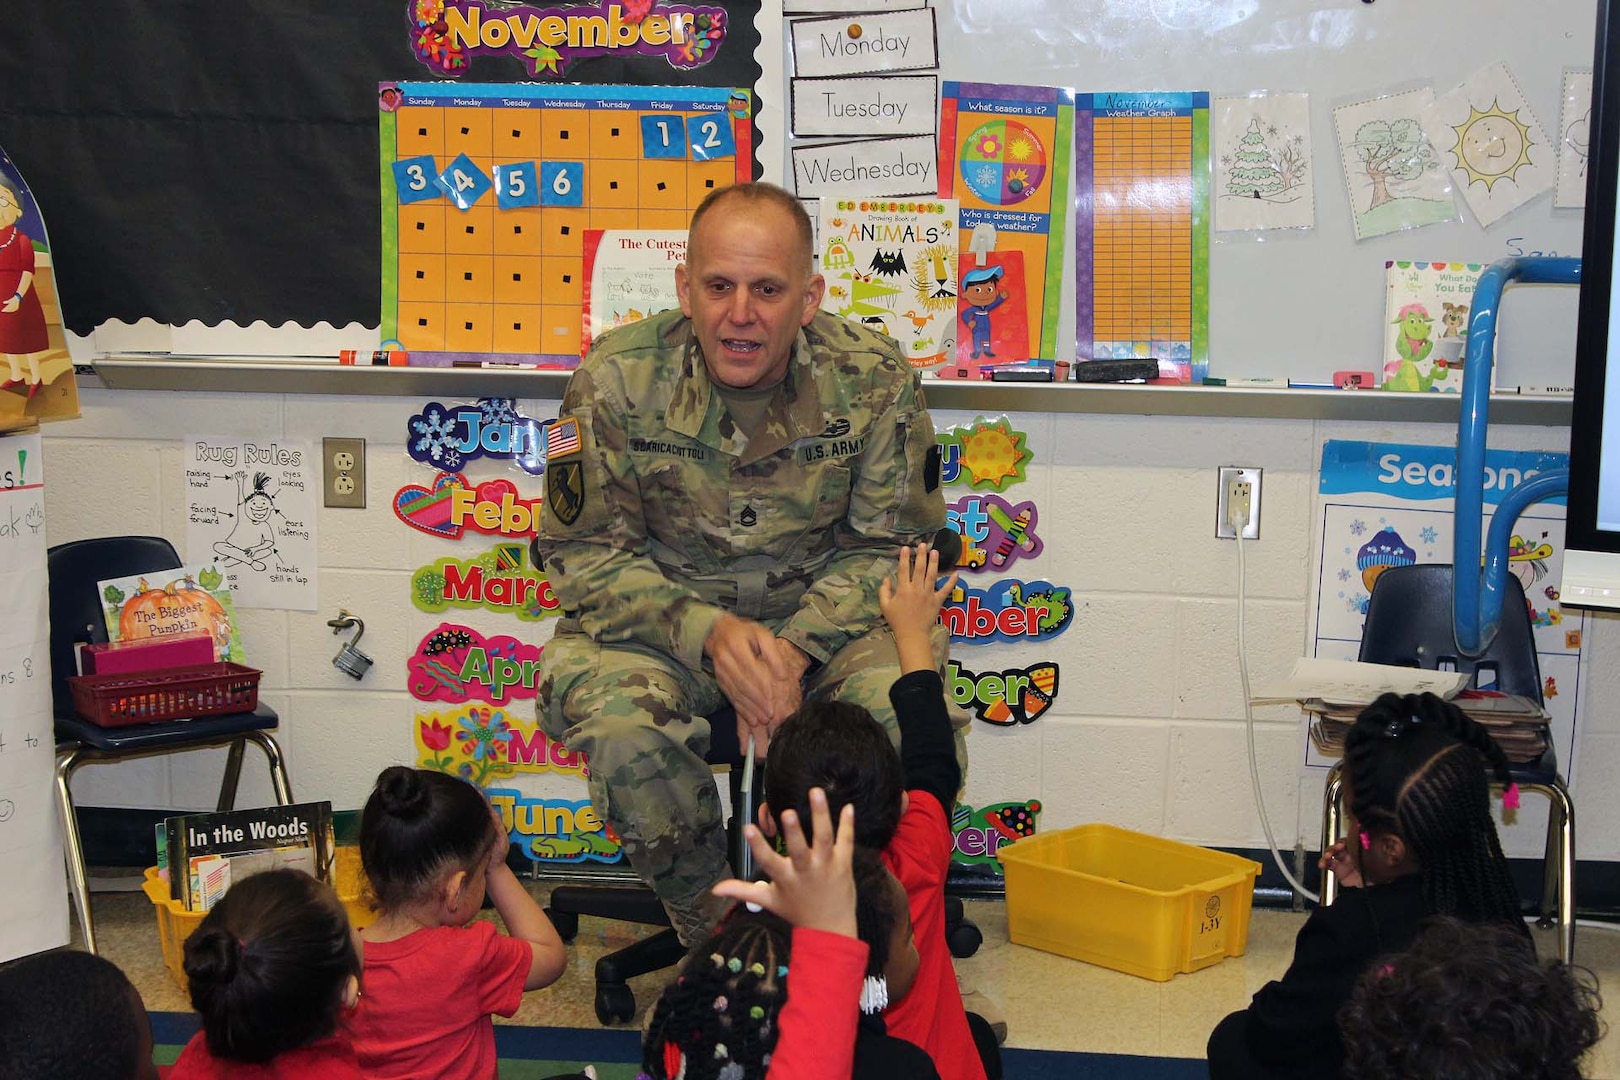 Army Sgt. 1st Class Richard Scaricaciottoli, a DLA Installation Philadelphia visual information specialist and Army reservist, speaks with students during a Veterans Day event at the Gilbert Spruance Elementary School Nov. 7, 2019 in Philadelphia.